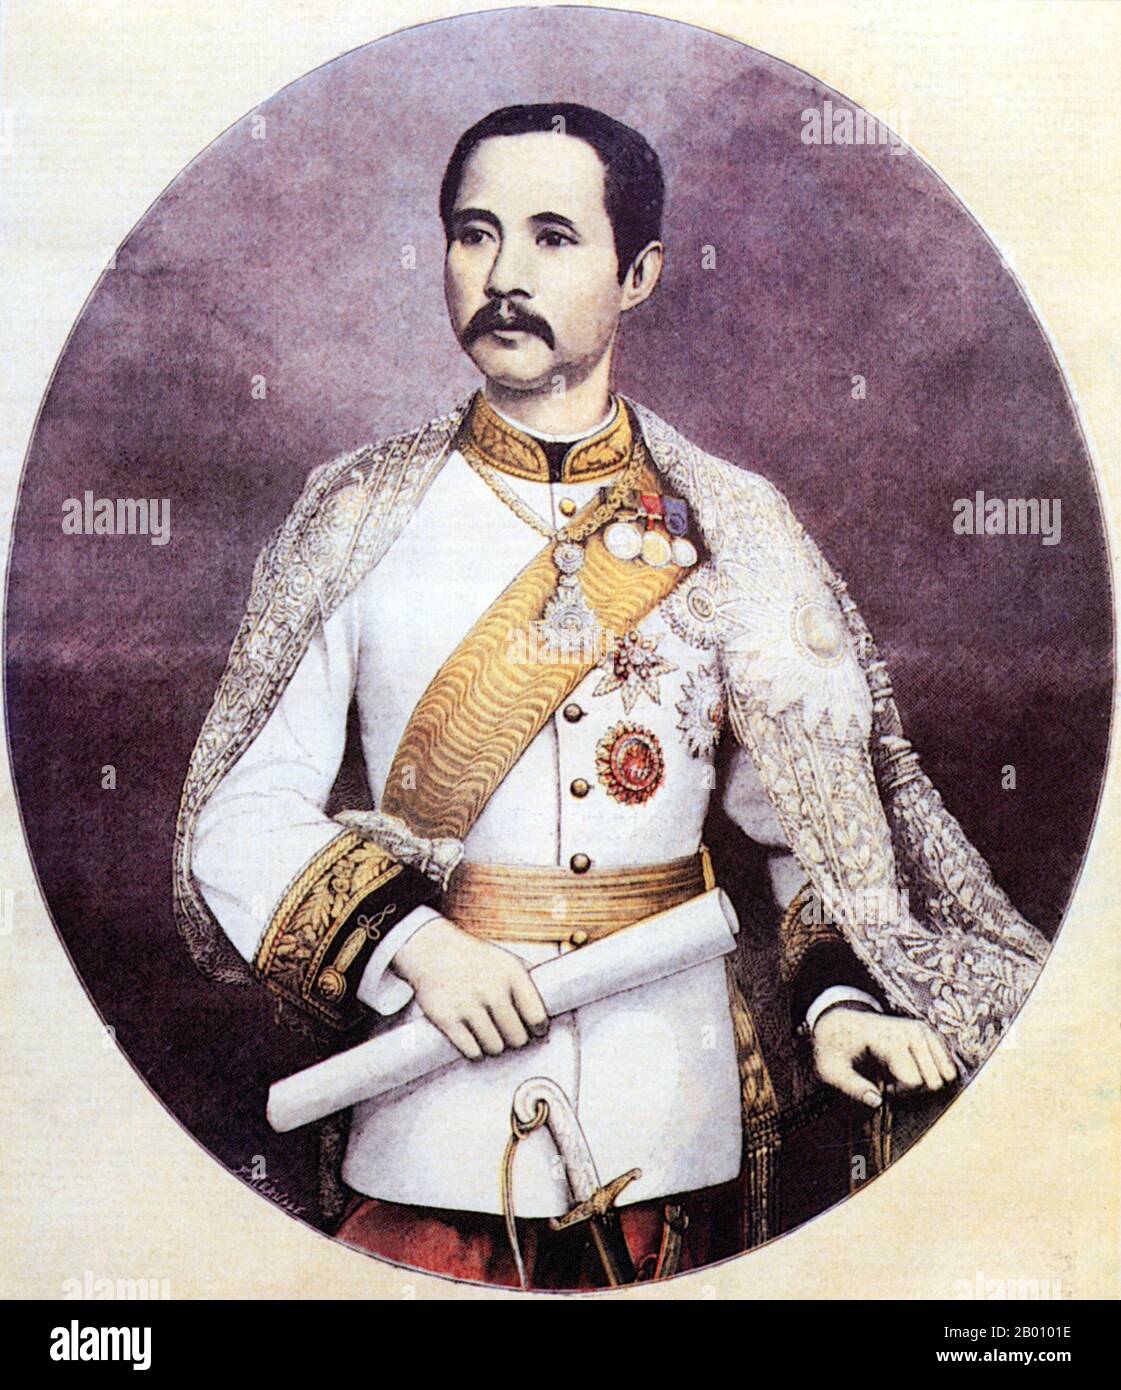 Thailand: King Rama V, Chulalongkorn (1 October 1868 – 23 October 1910), 5th monarch of the Chakri Dynasty. Portrait by Fortune-Louis Meaulle (1844-1916), 1897.  Phra Bat Somdet Phra Poramintharamaha Chulalongkorn Phra Chunla Chom Klao Chao Yu Hua, or Rama V (20 September 1853 – 23 October 1910) was the fifth monarch of Siam under the House of Chakri. He is considered one of the greatest kings of Siam. His reign was characterized by the modernisation of Siam, immense government and social reforms, and territorial cessions to the British Empire and French Indochina. Stock Photo